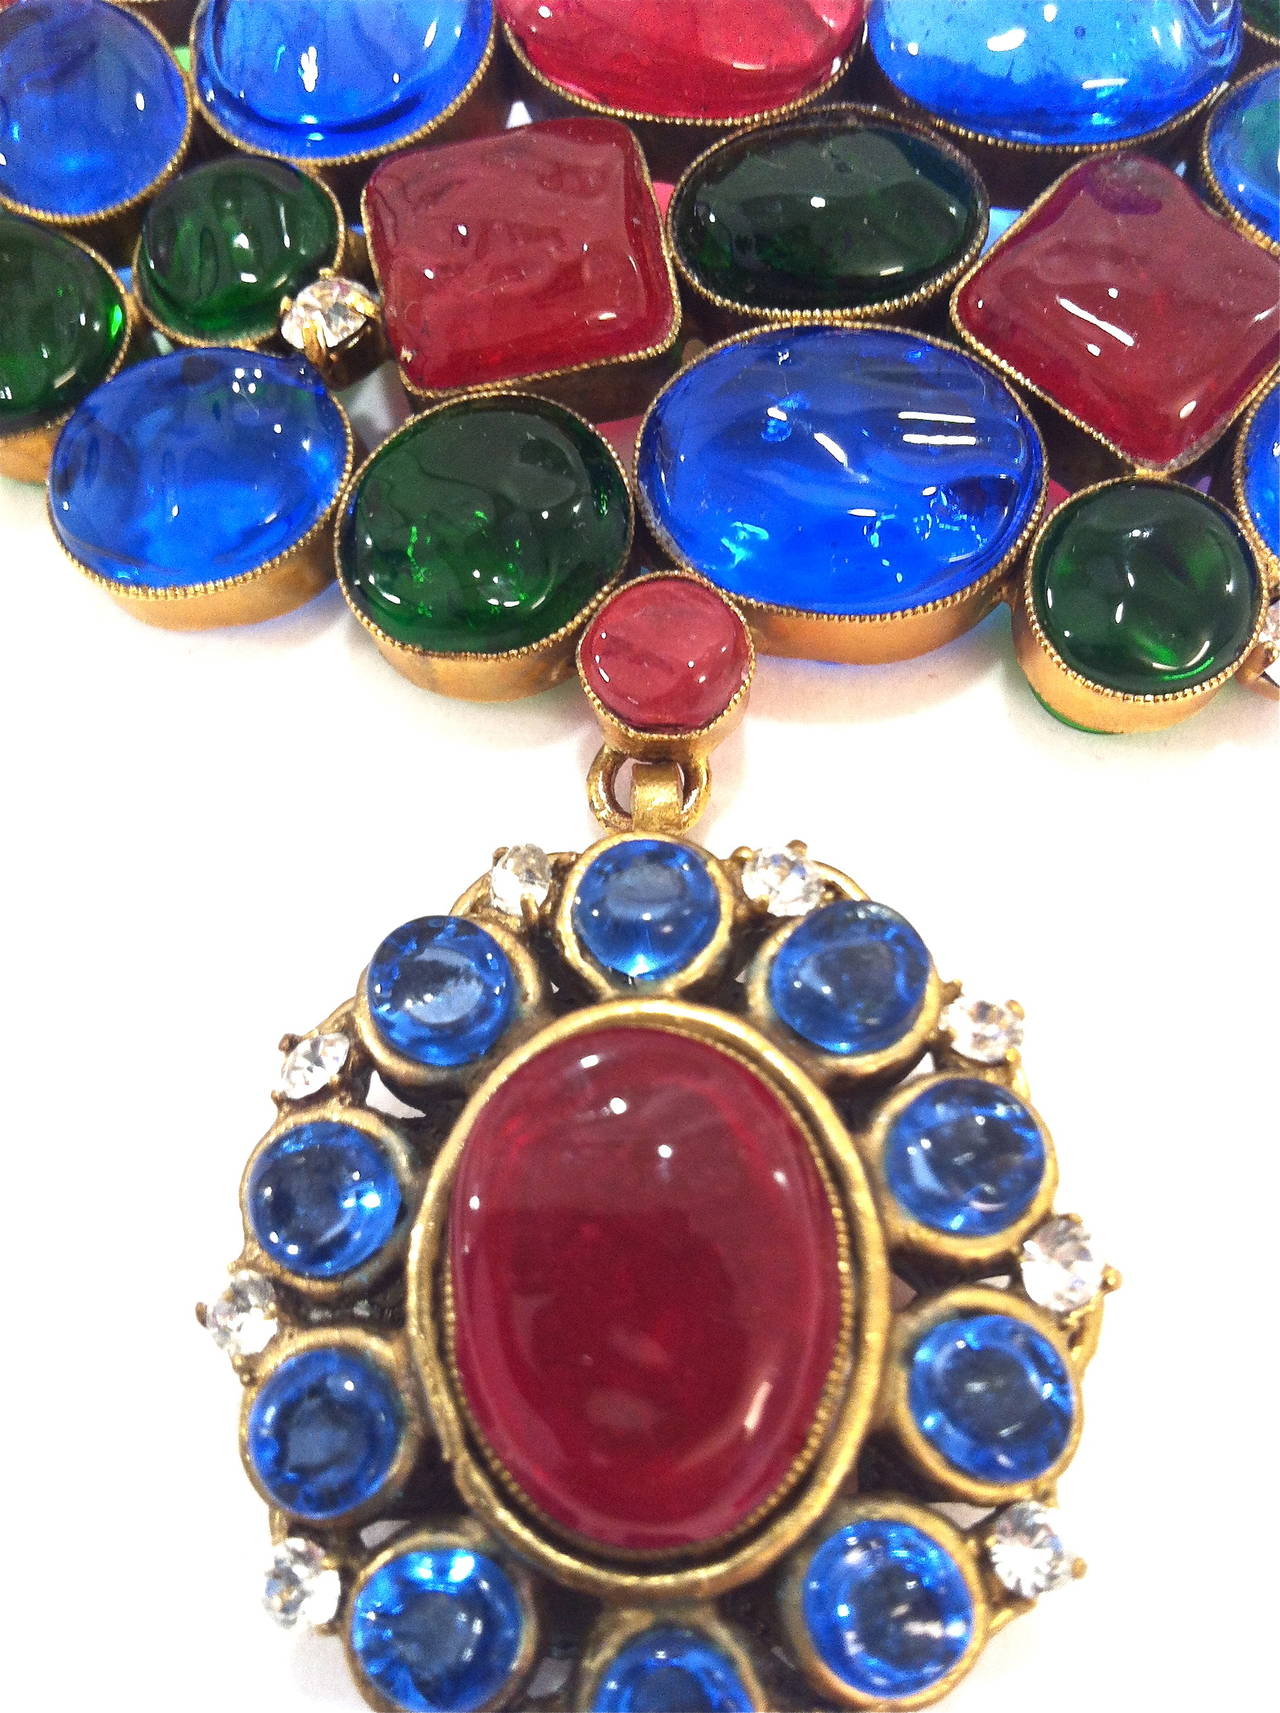 Women's Rare 1970's Mademoiselle Chanel  Byzantine Necklace by Gripoix